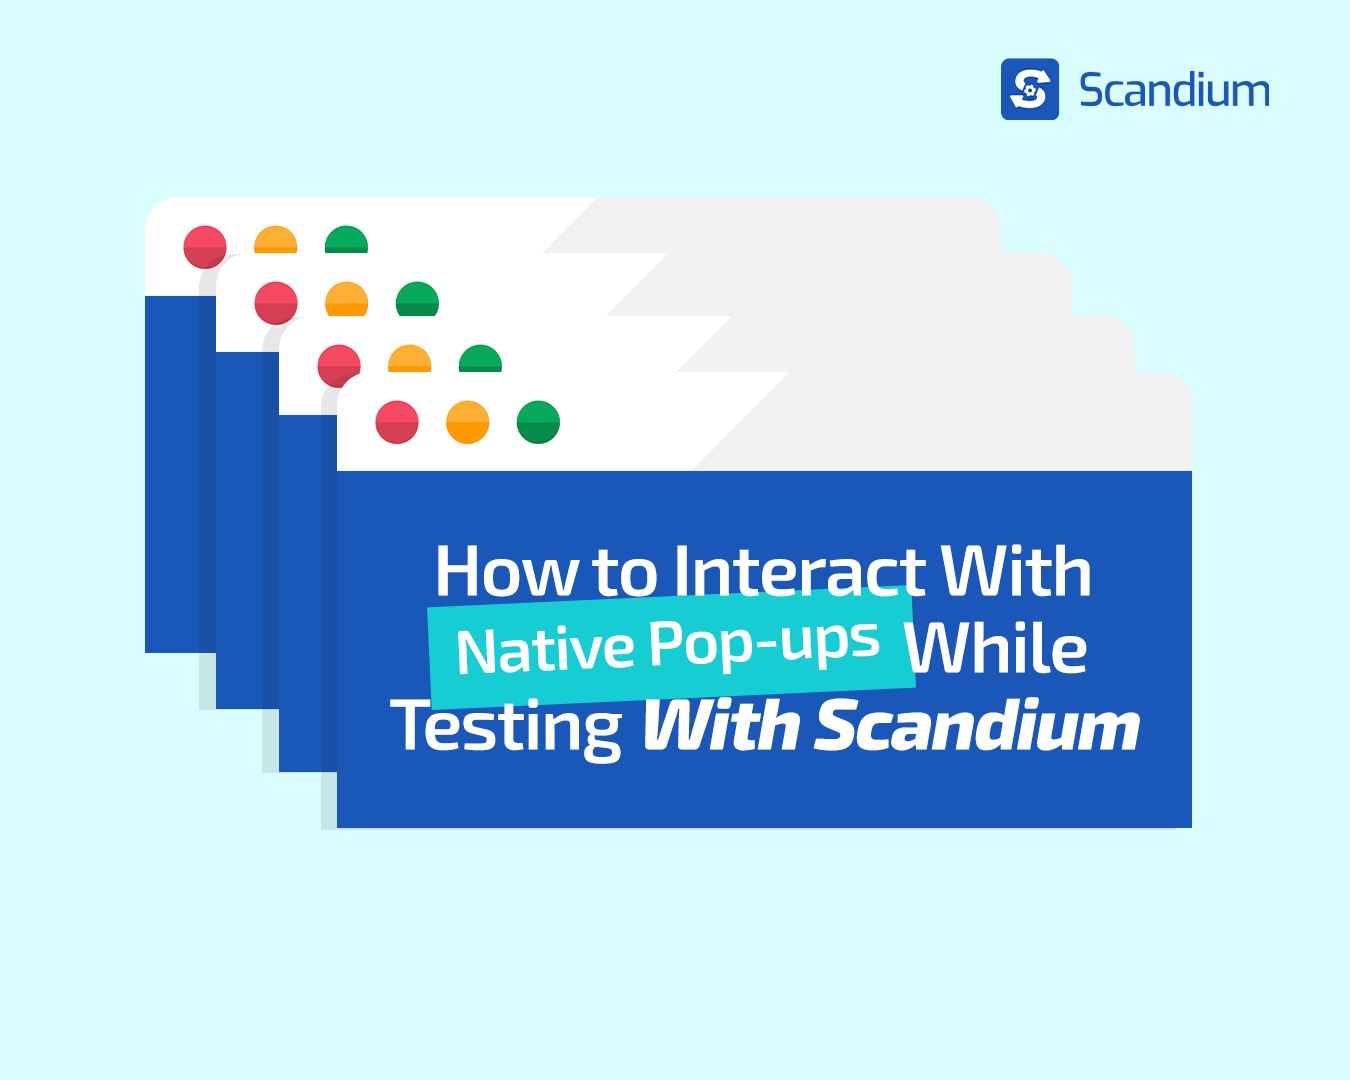 How to Interact With Native Pop-ups While Testing With Scandium